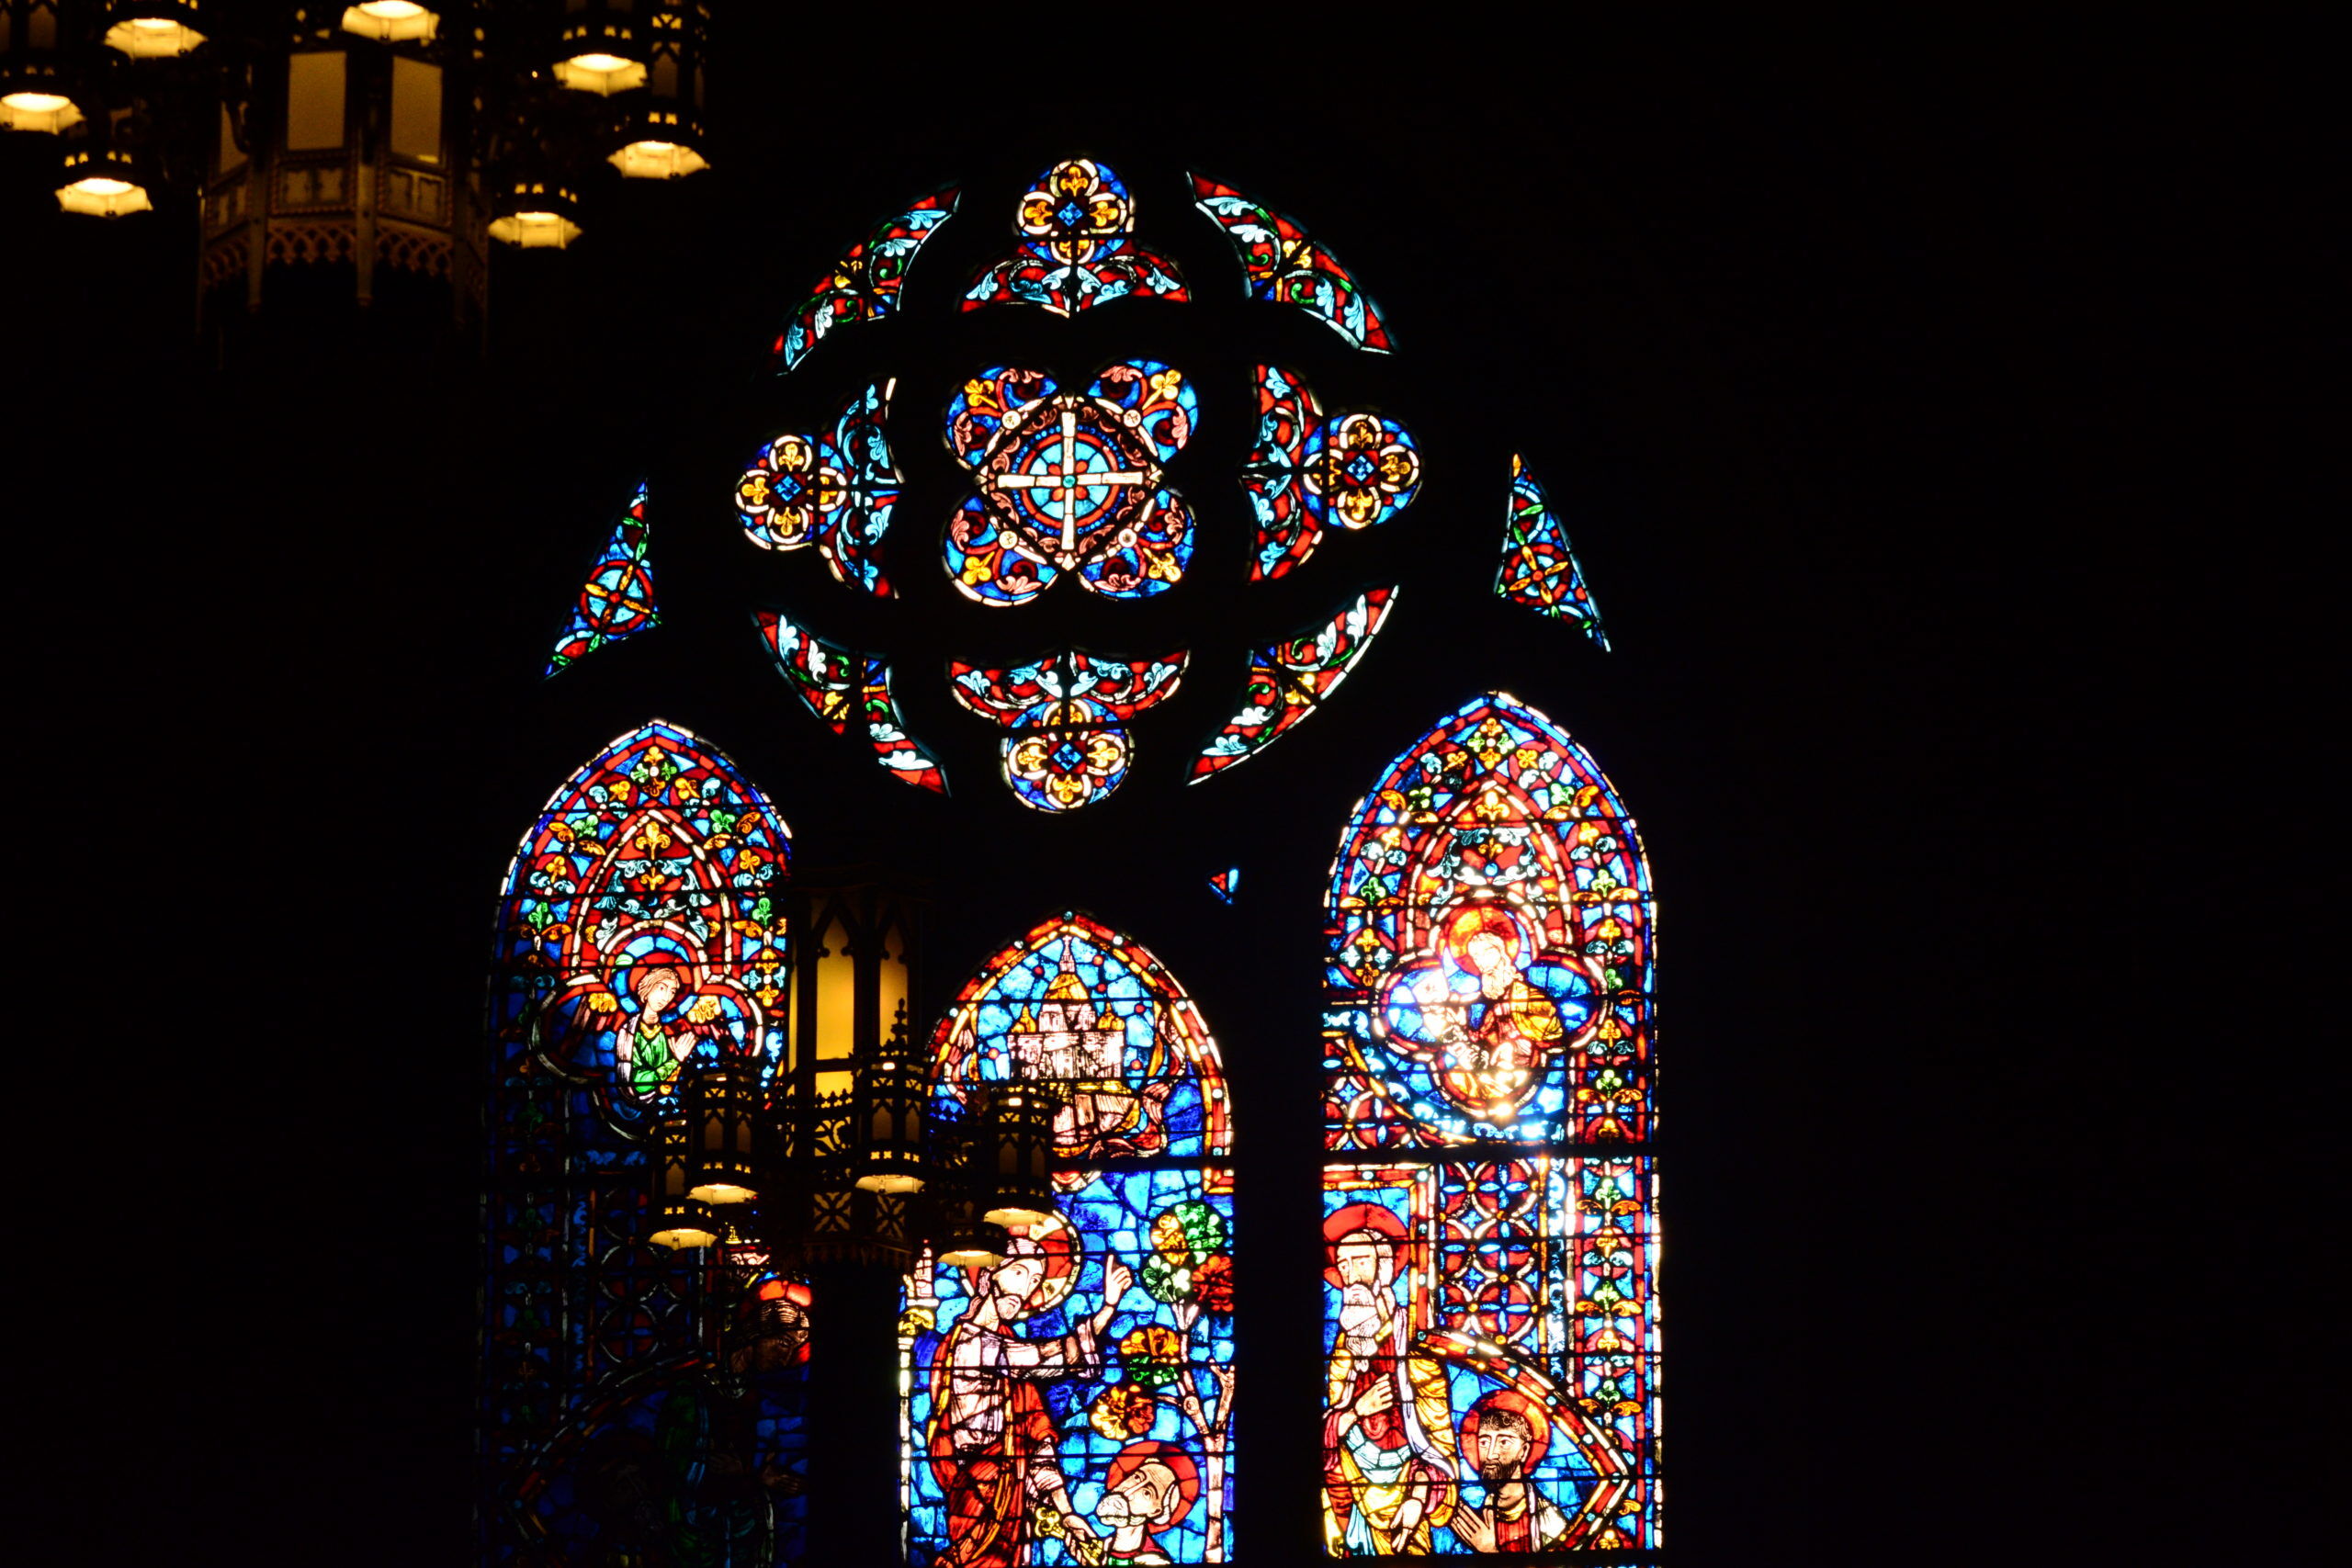 A stained glass window at the Cathedral Basilica of the Sacred Heart in Newark on June 8, 2020 during the Chrism Mass.